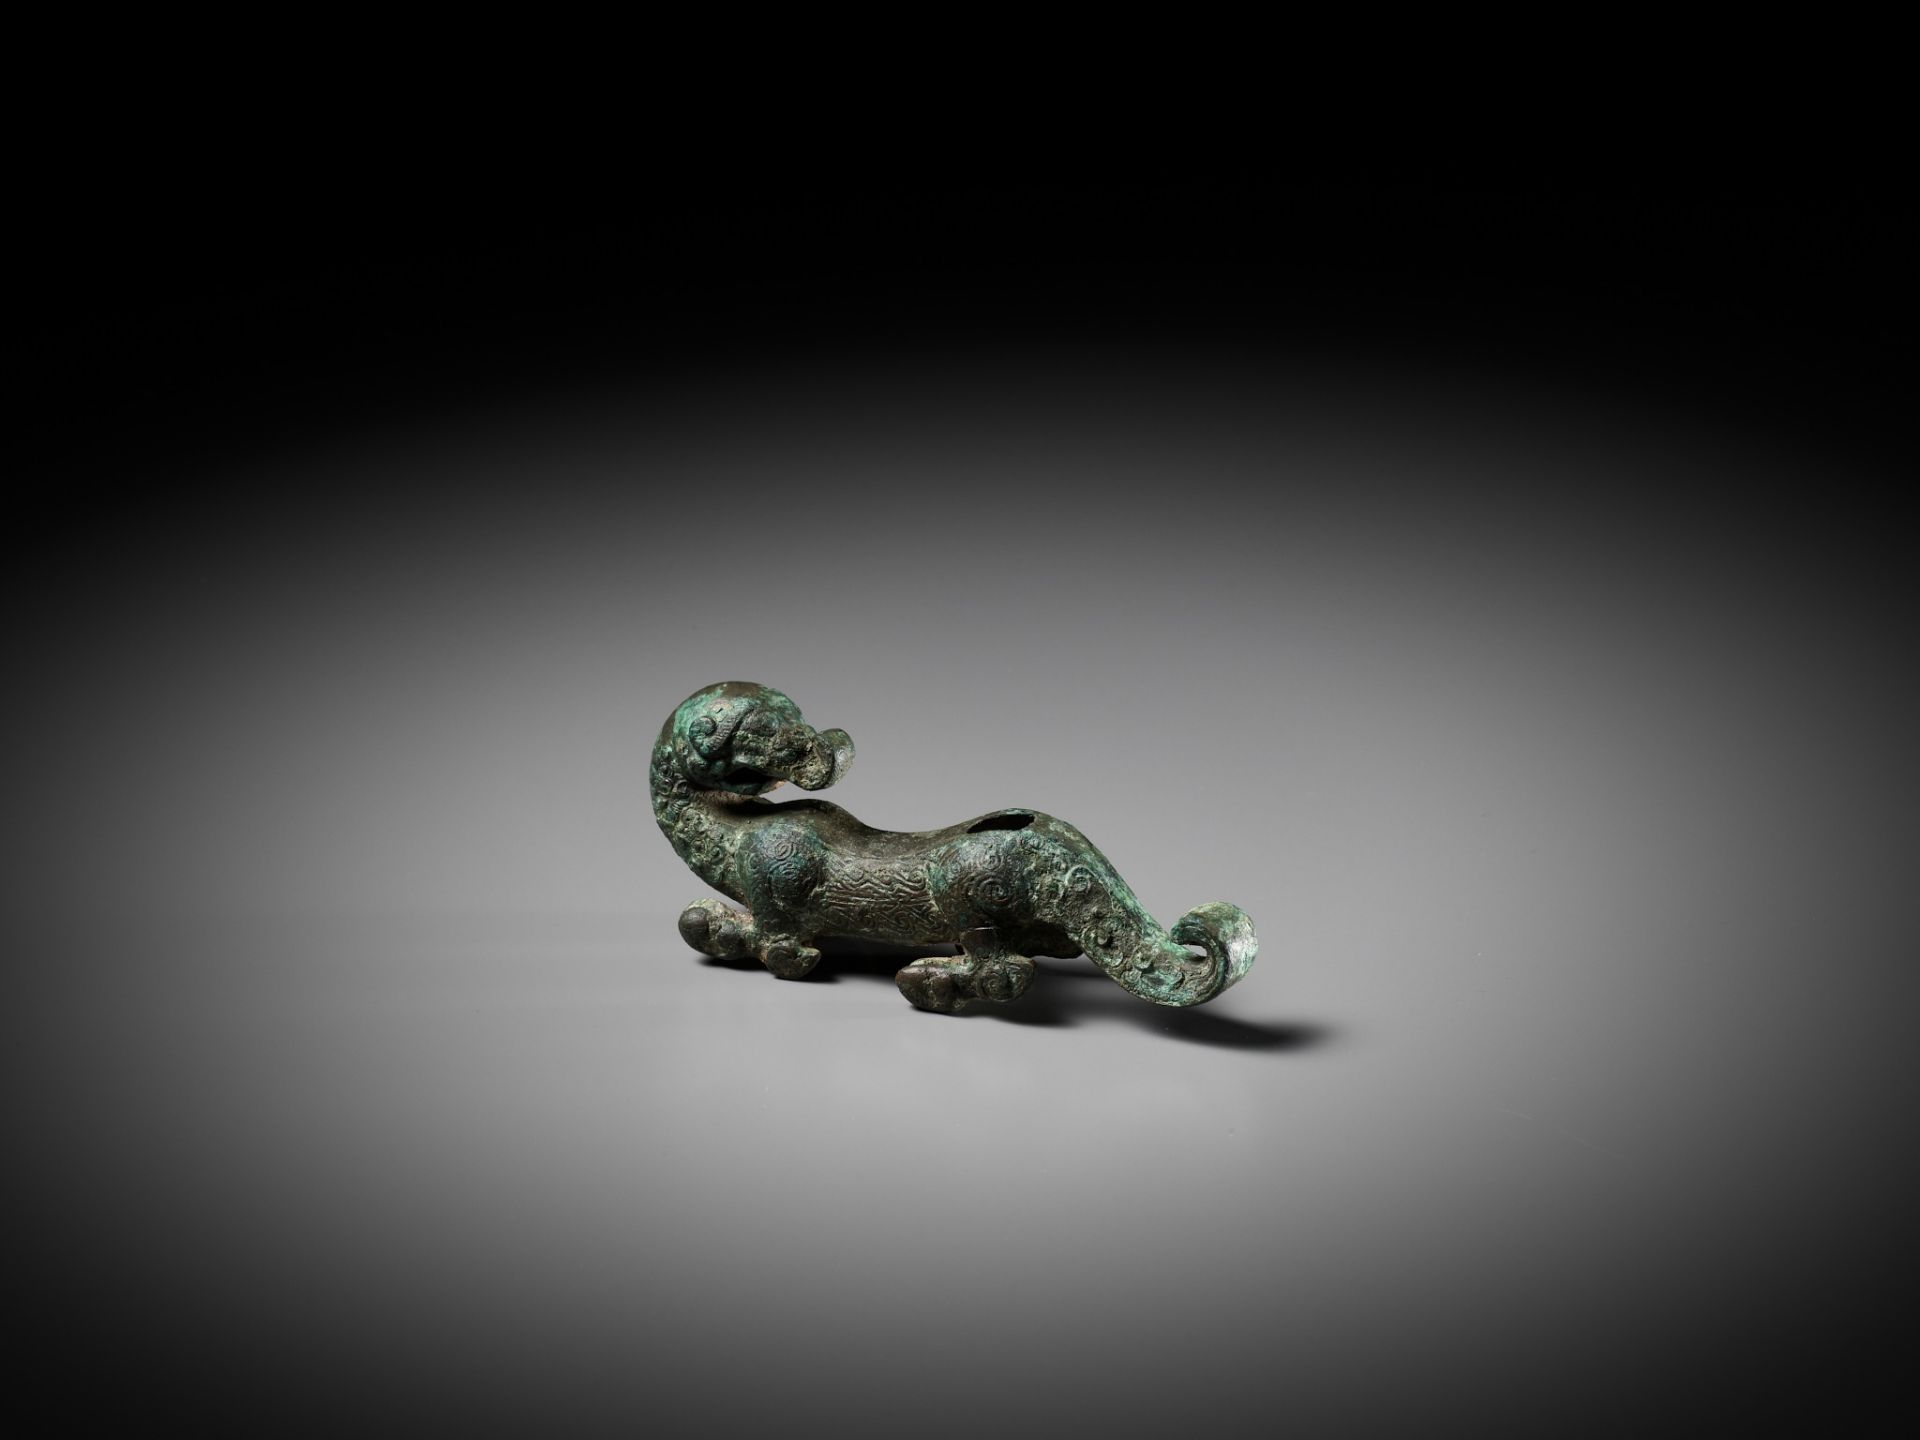 A SUPERB BRONZE FIGURE OF A DRAGON, EASTERN ZHOU DYNASTY, CHINA, 770-256 BC - Image 12 of 23